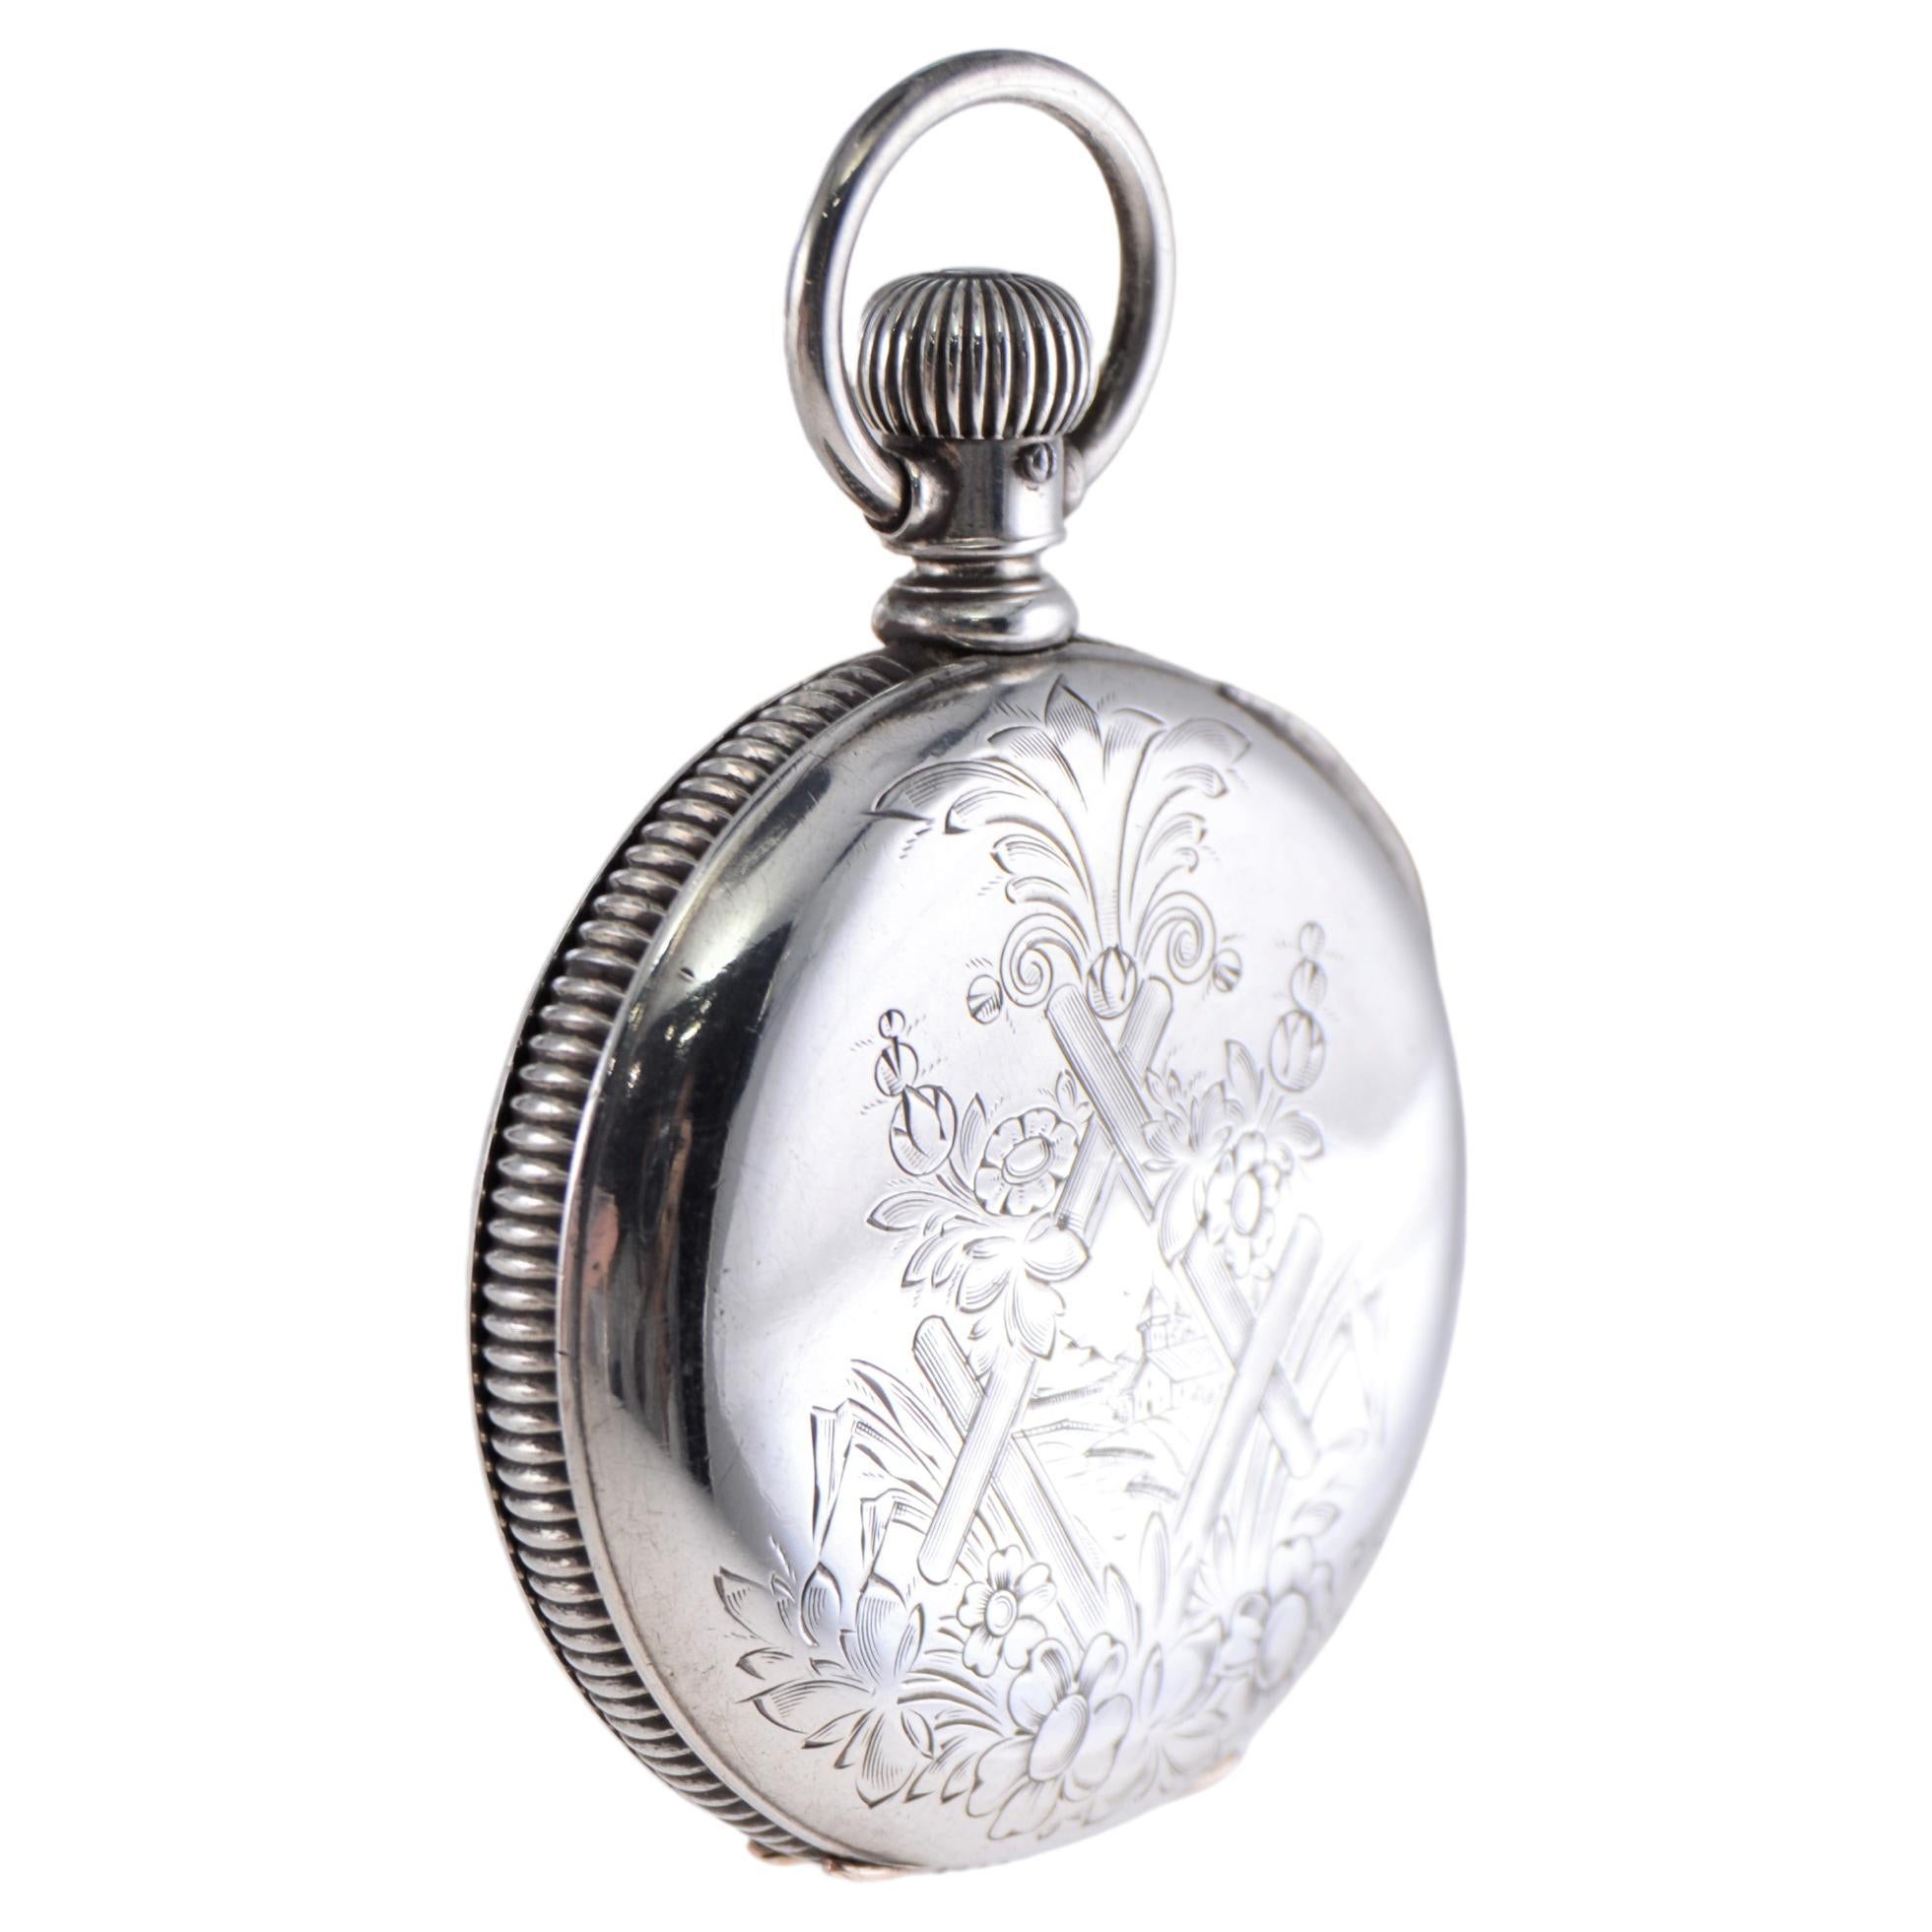 Illinois Silver Hunters Case Pocket Watch from 1893 with Pocket Watch Chain  4